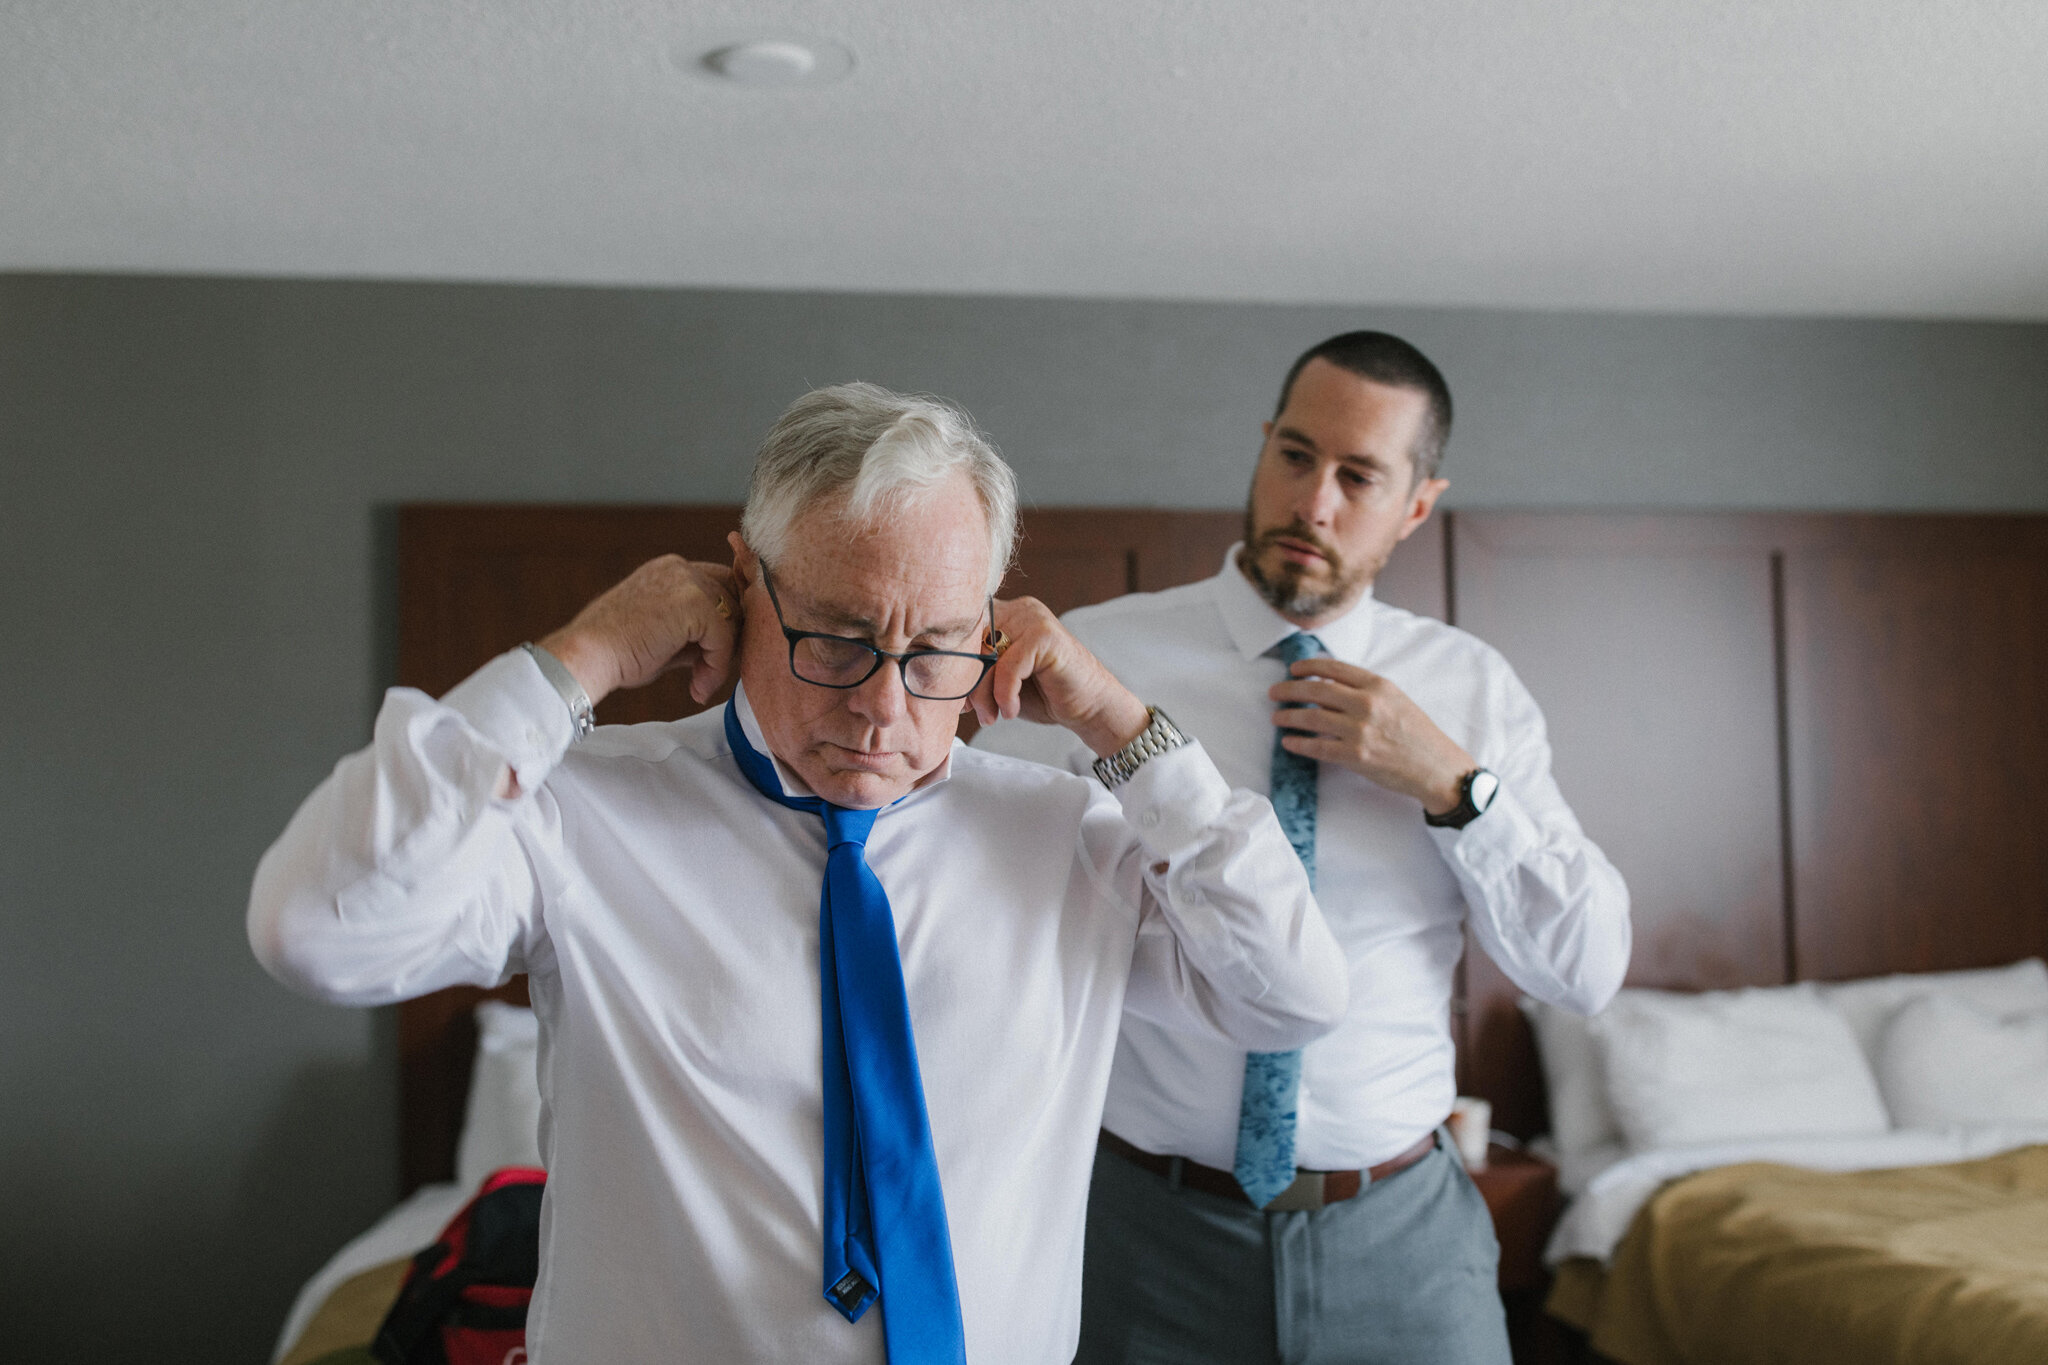 Father of the groom and brother getting ready together